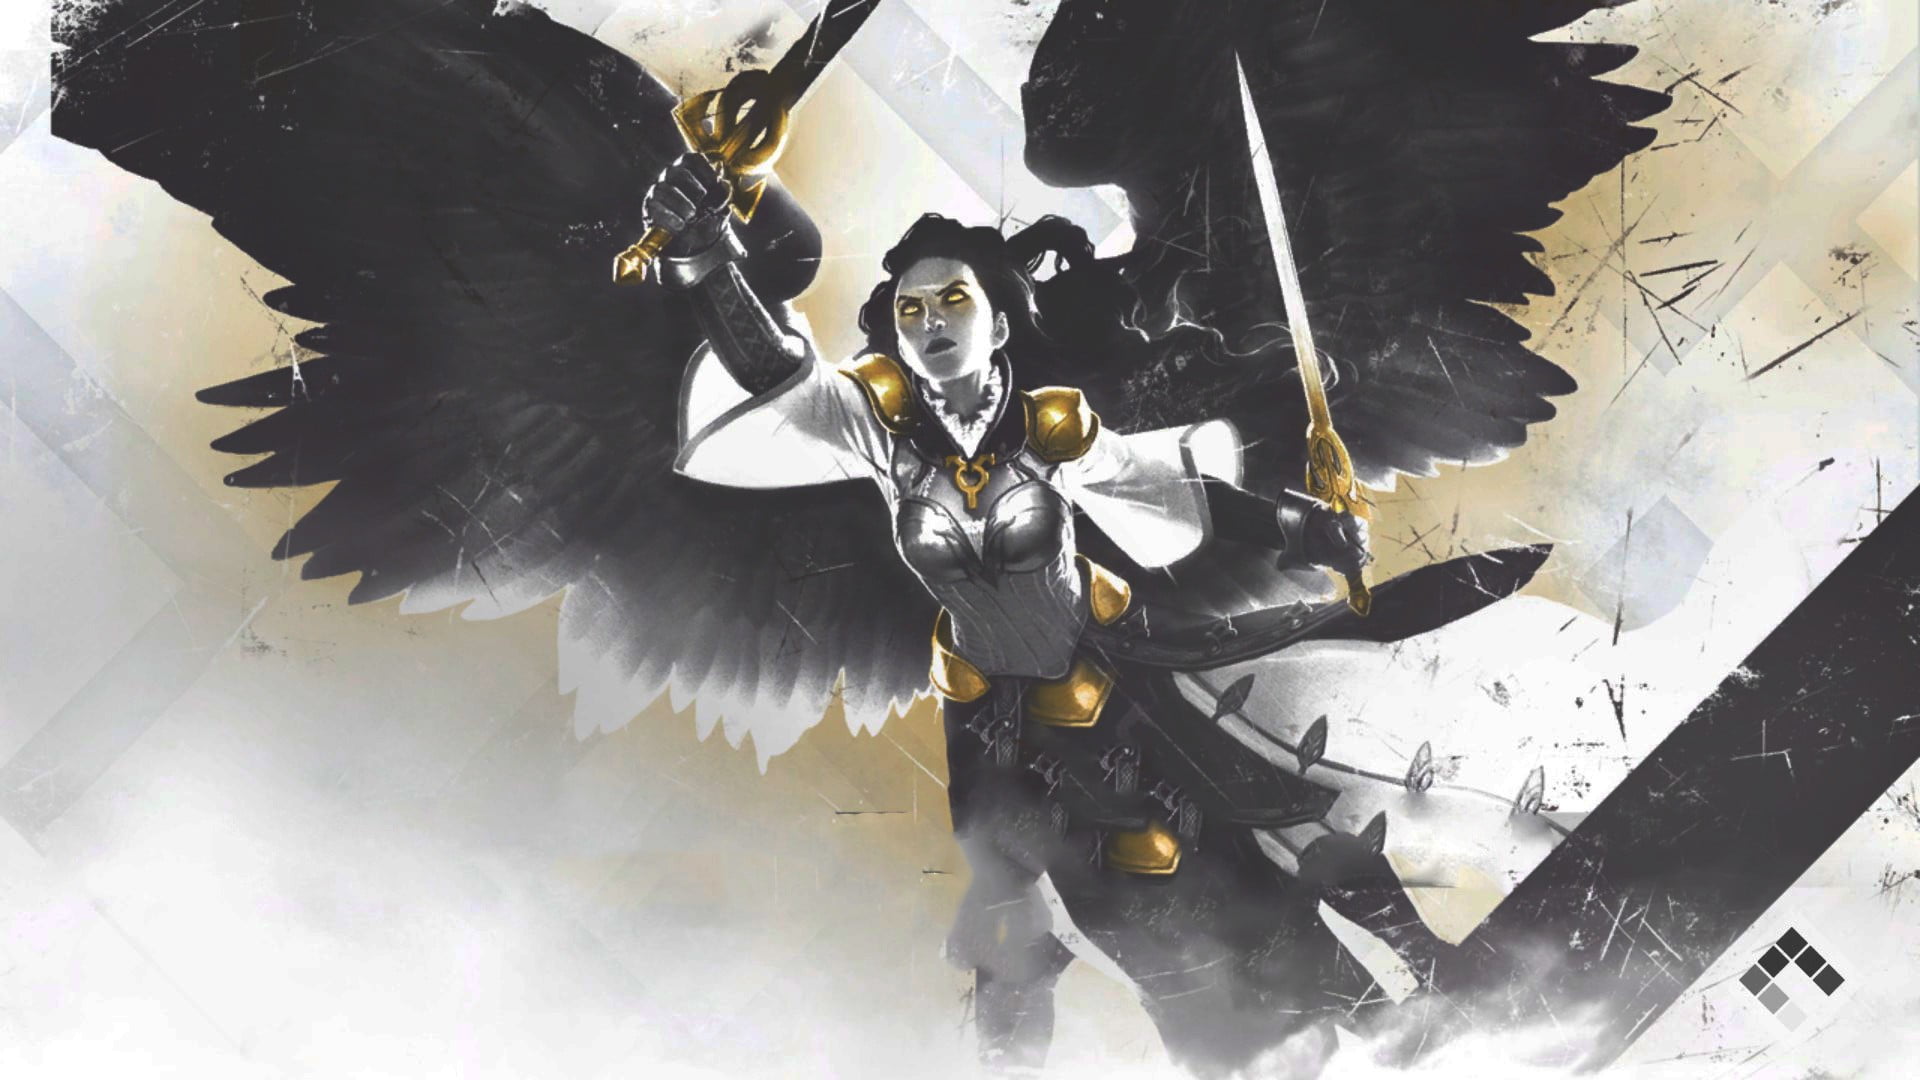 black and white swordsman character illustration, Magic: The Gathering, Steam (software), angel